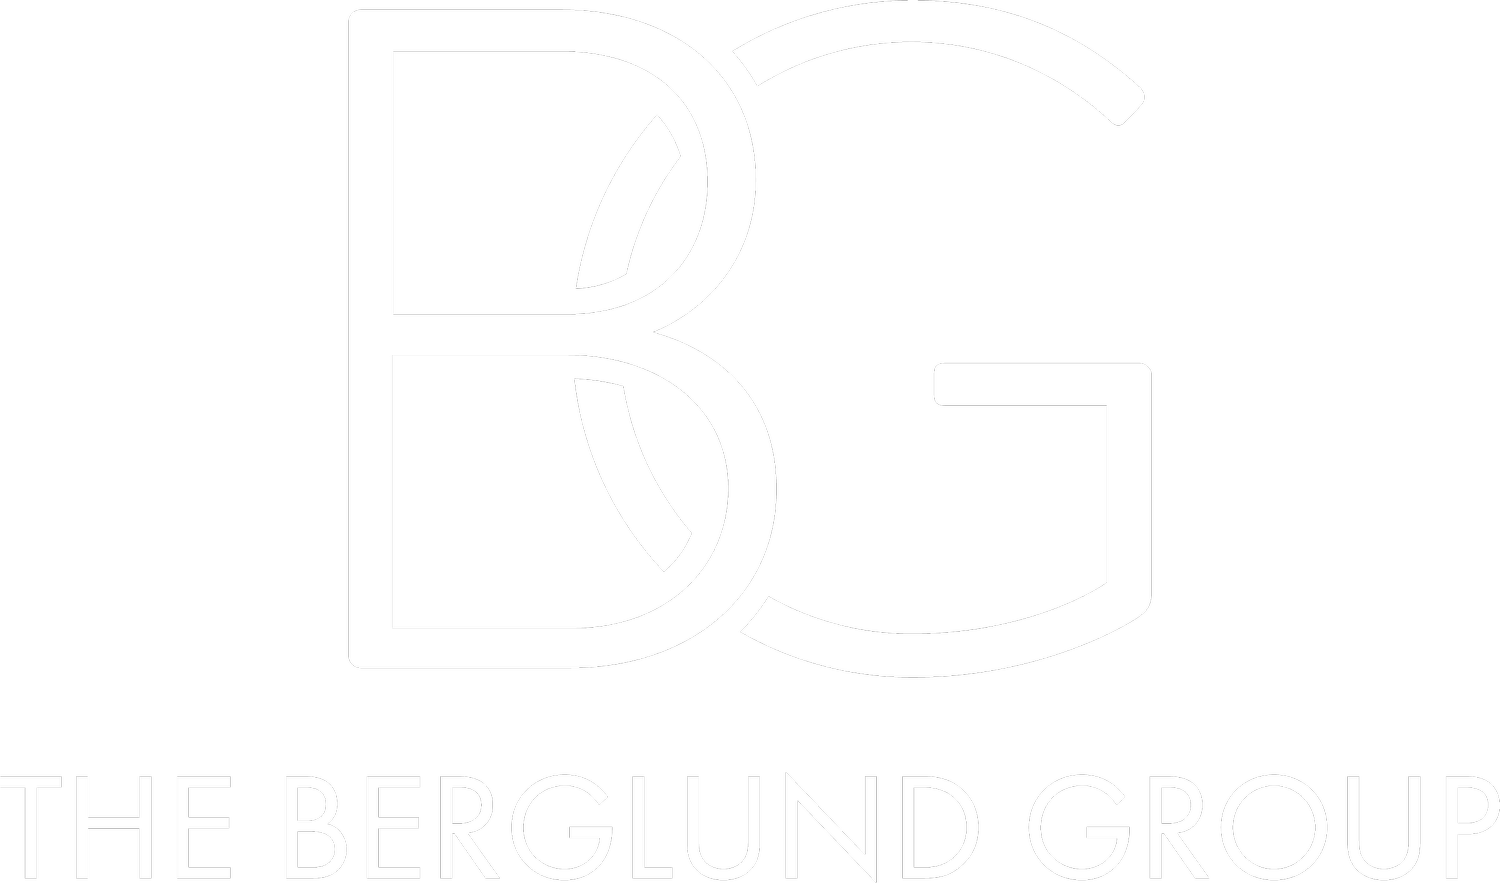 THE BERGLUND GROUP